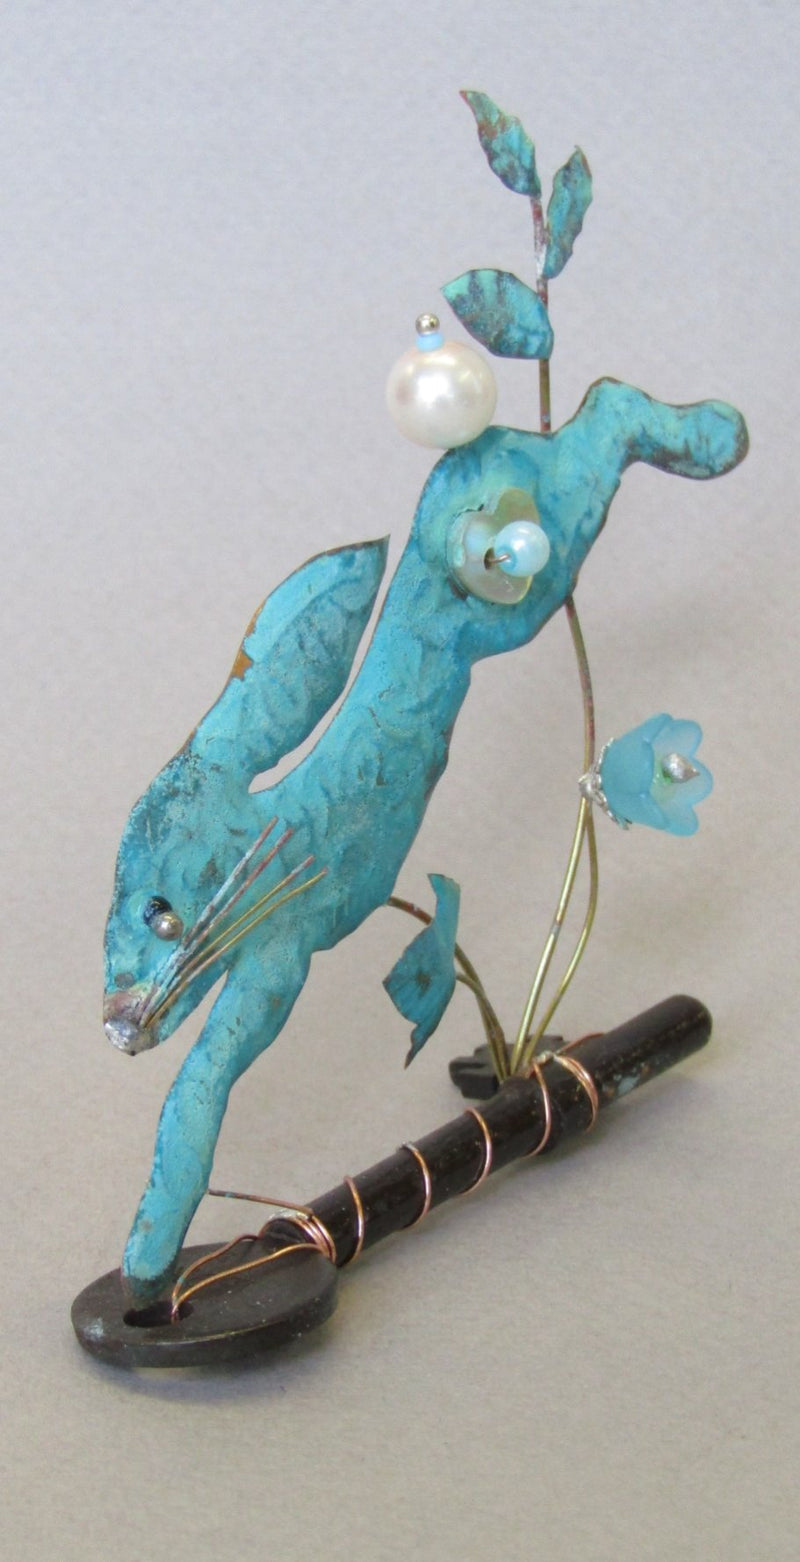 Small Leaping Hare on a Key Assemblage by Linda Lovatt